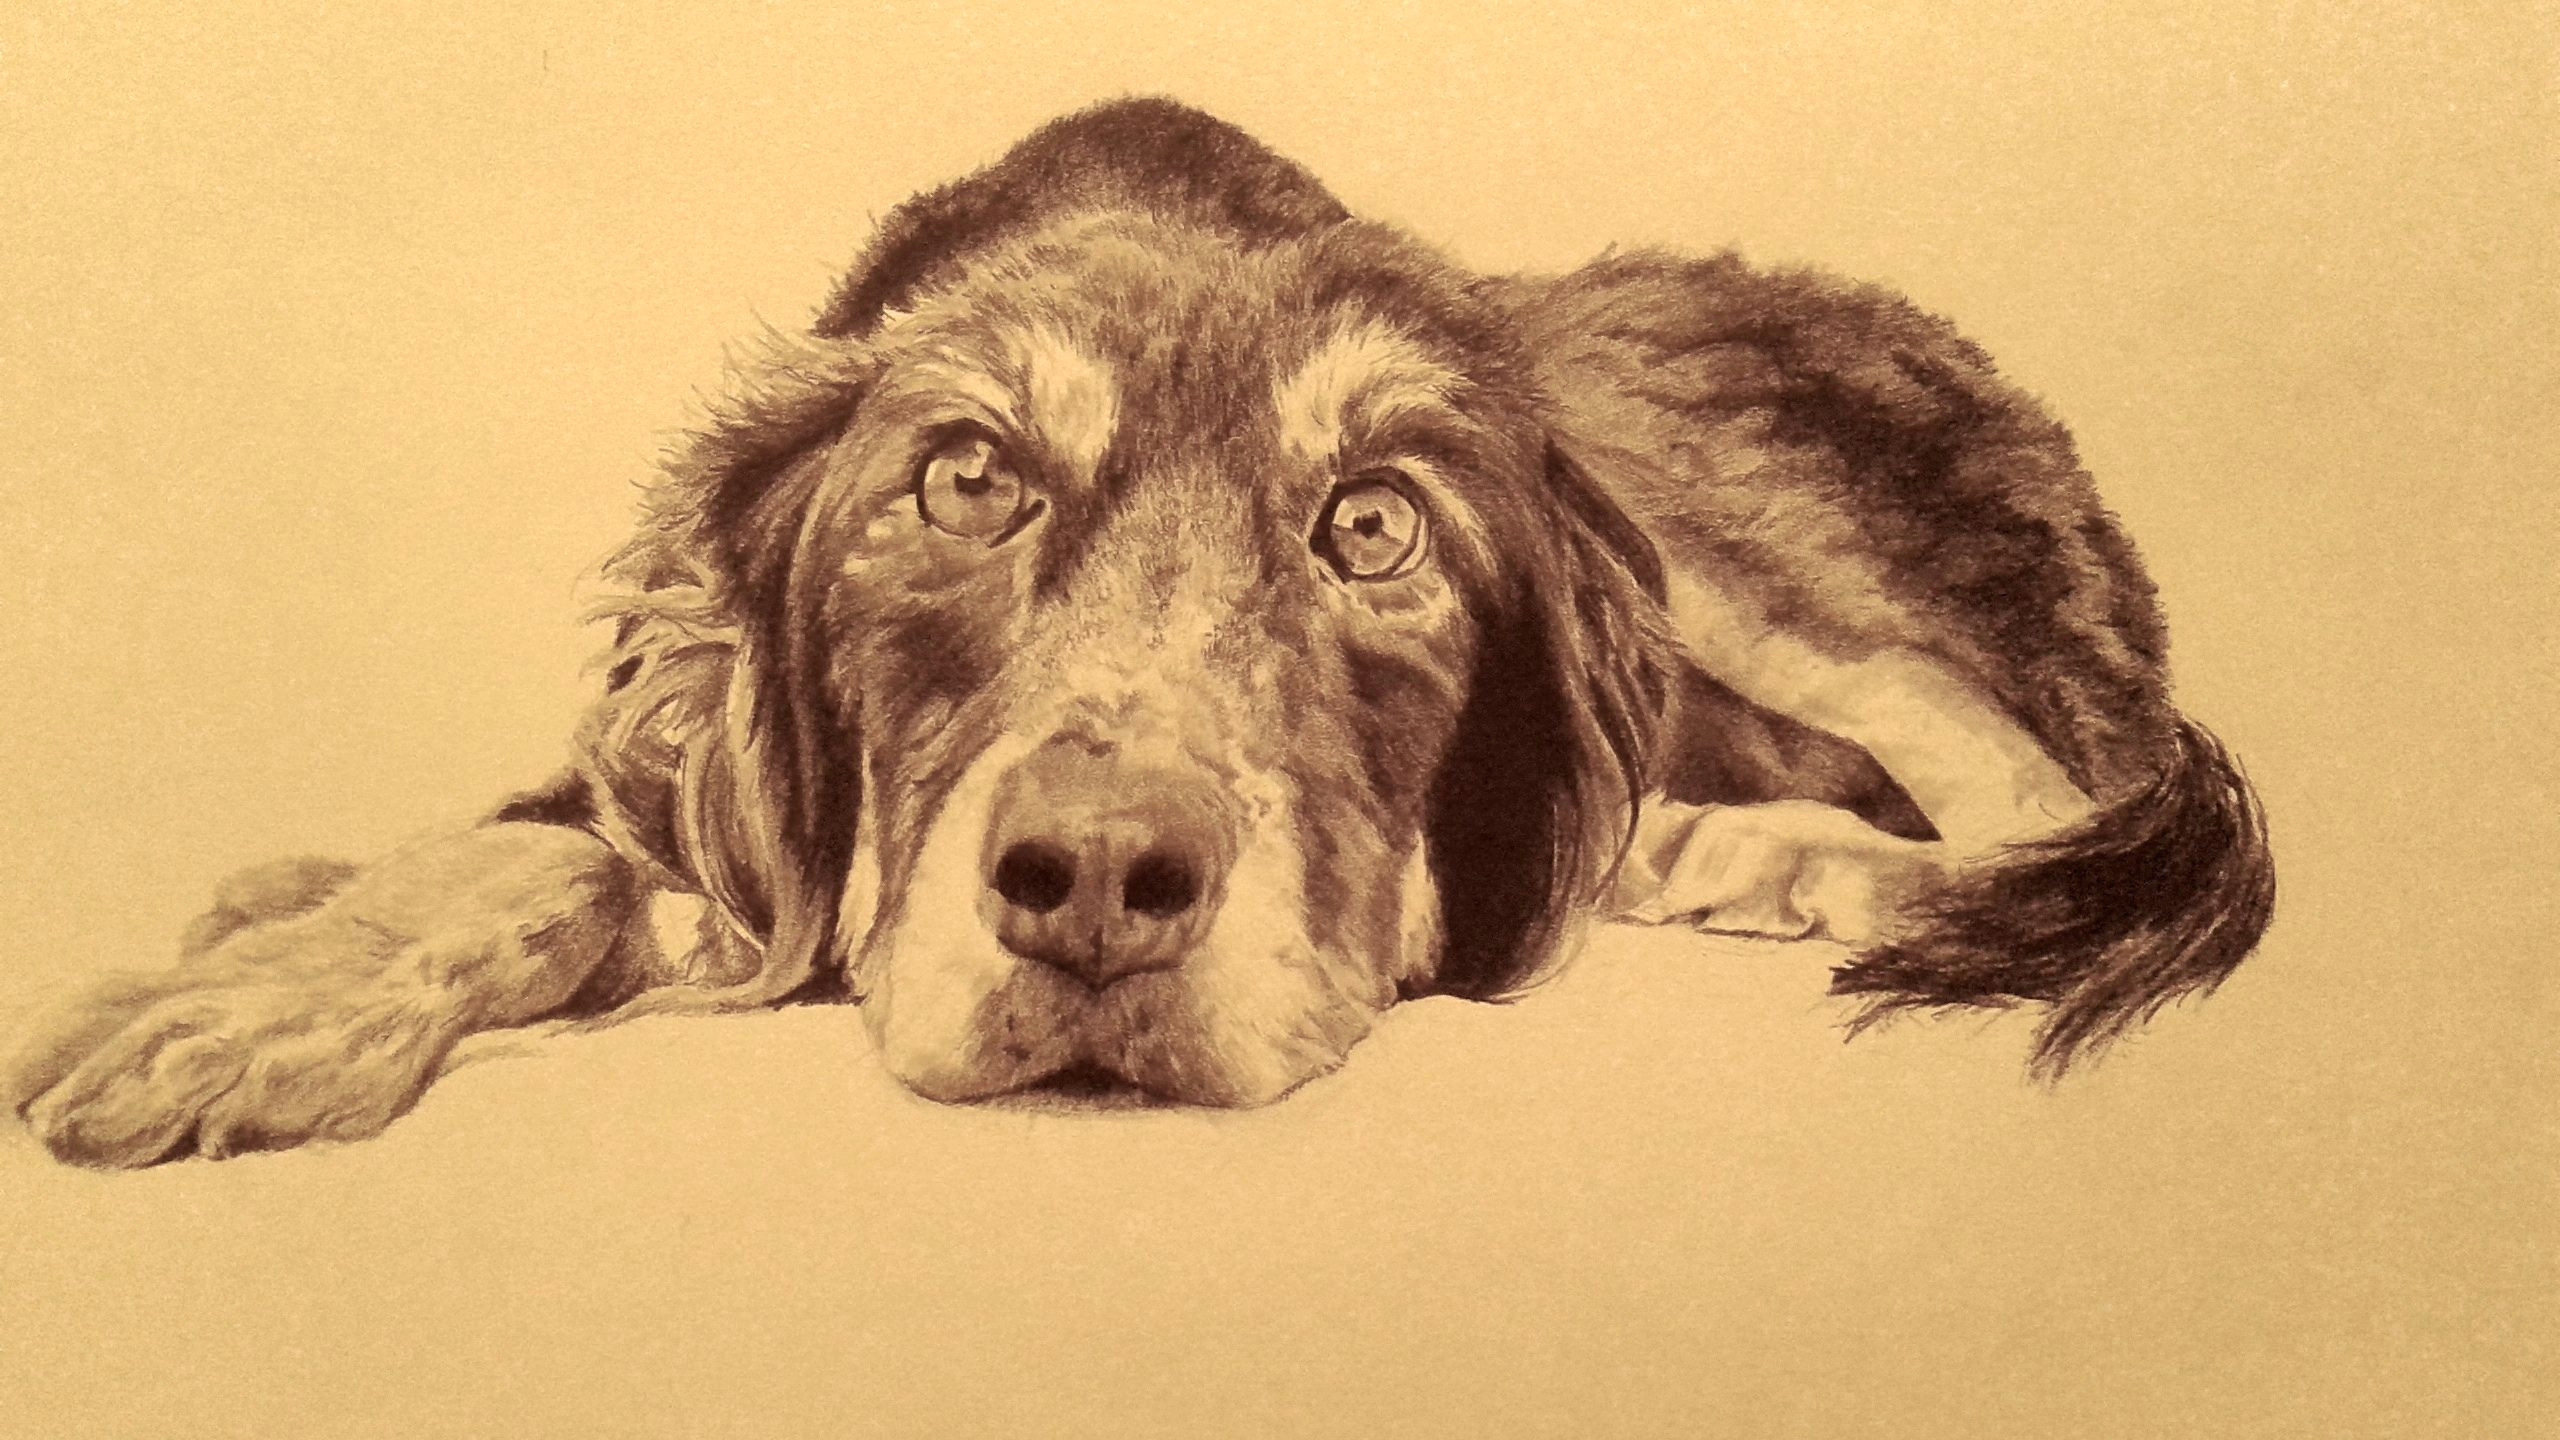 drawing of my friend s dog graphite art pencil drawings